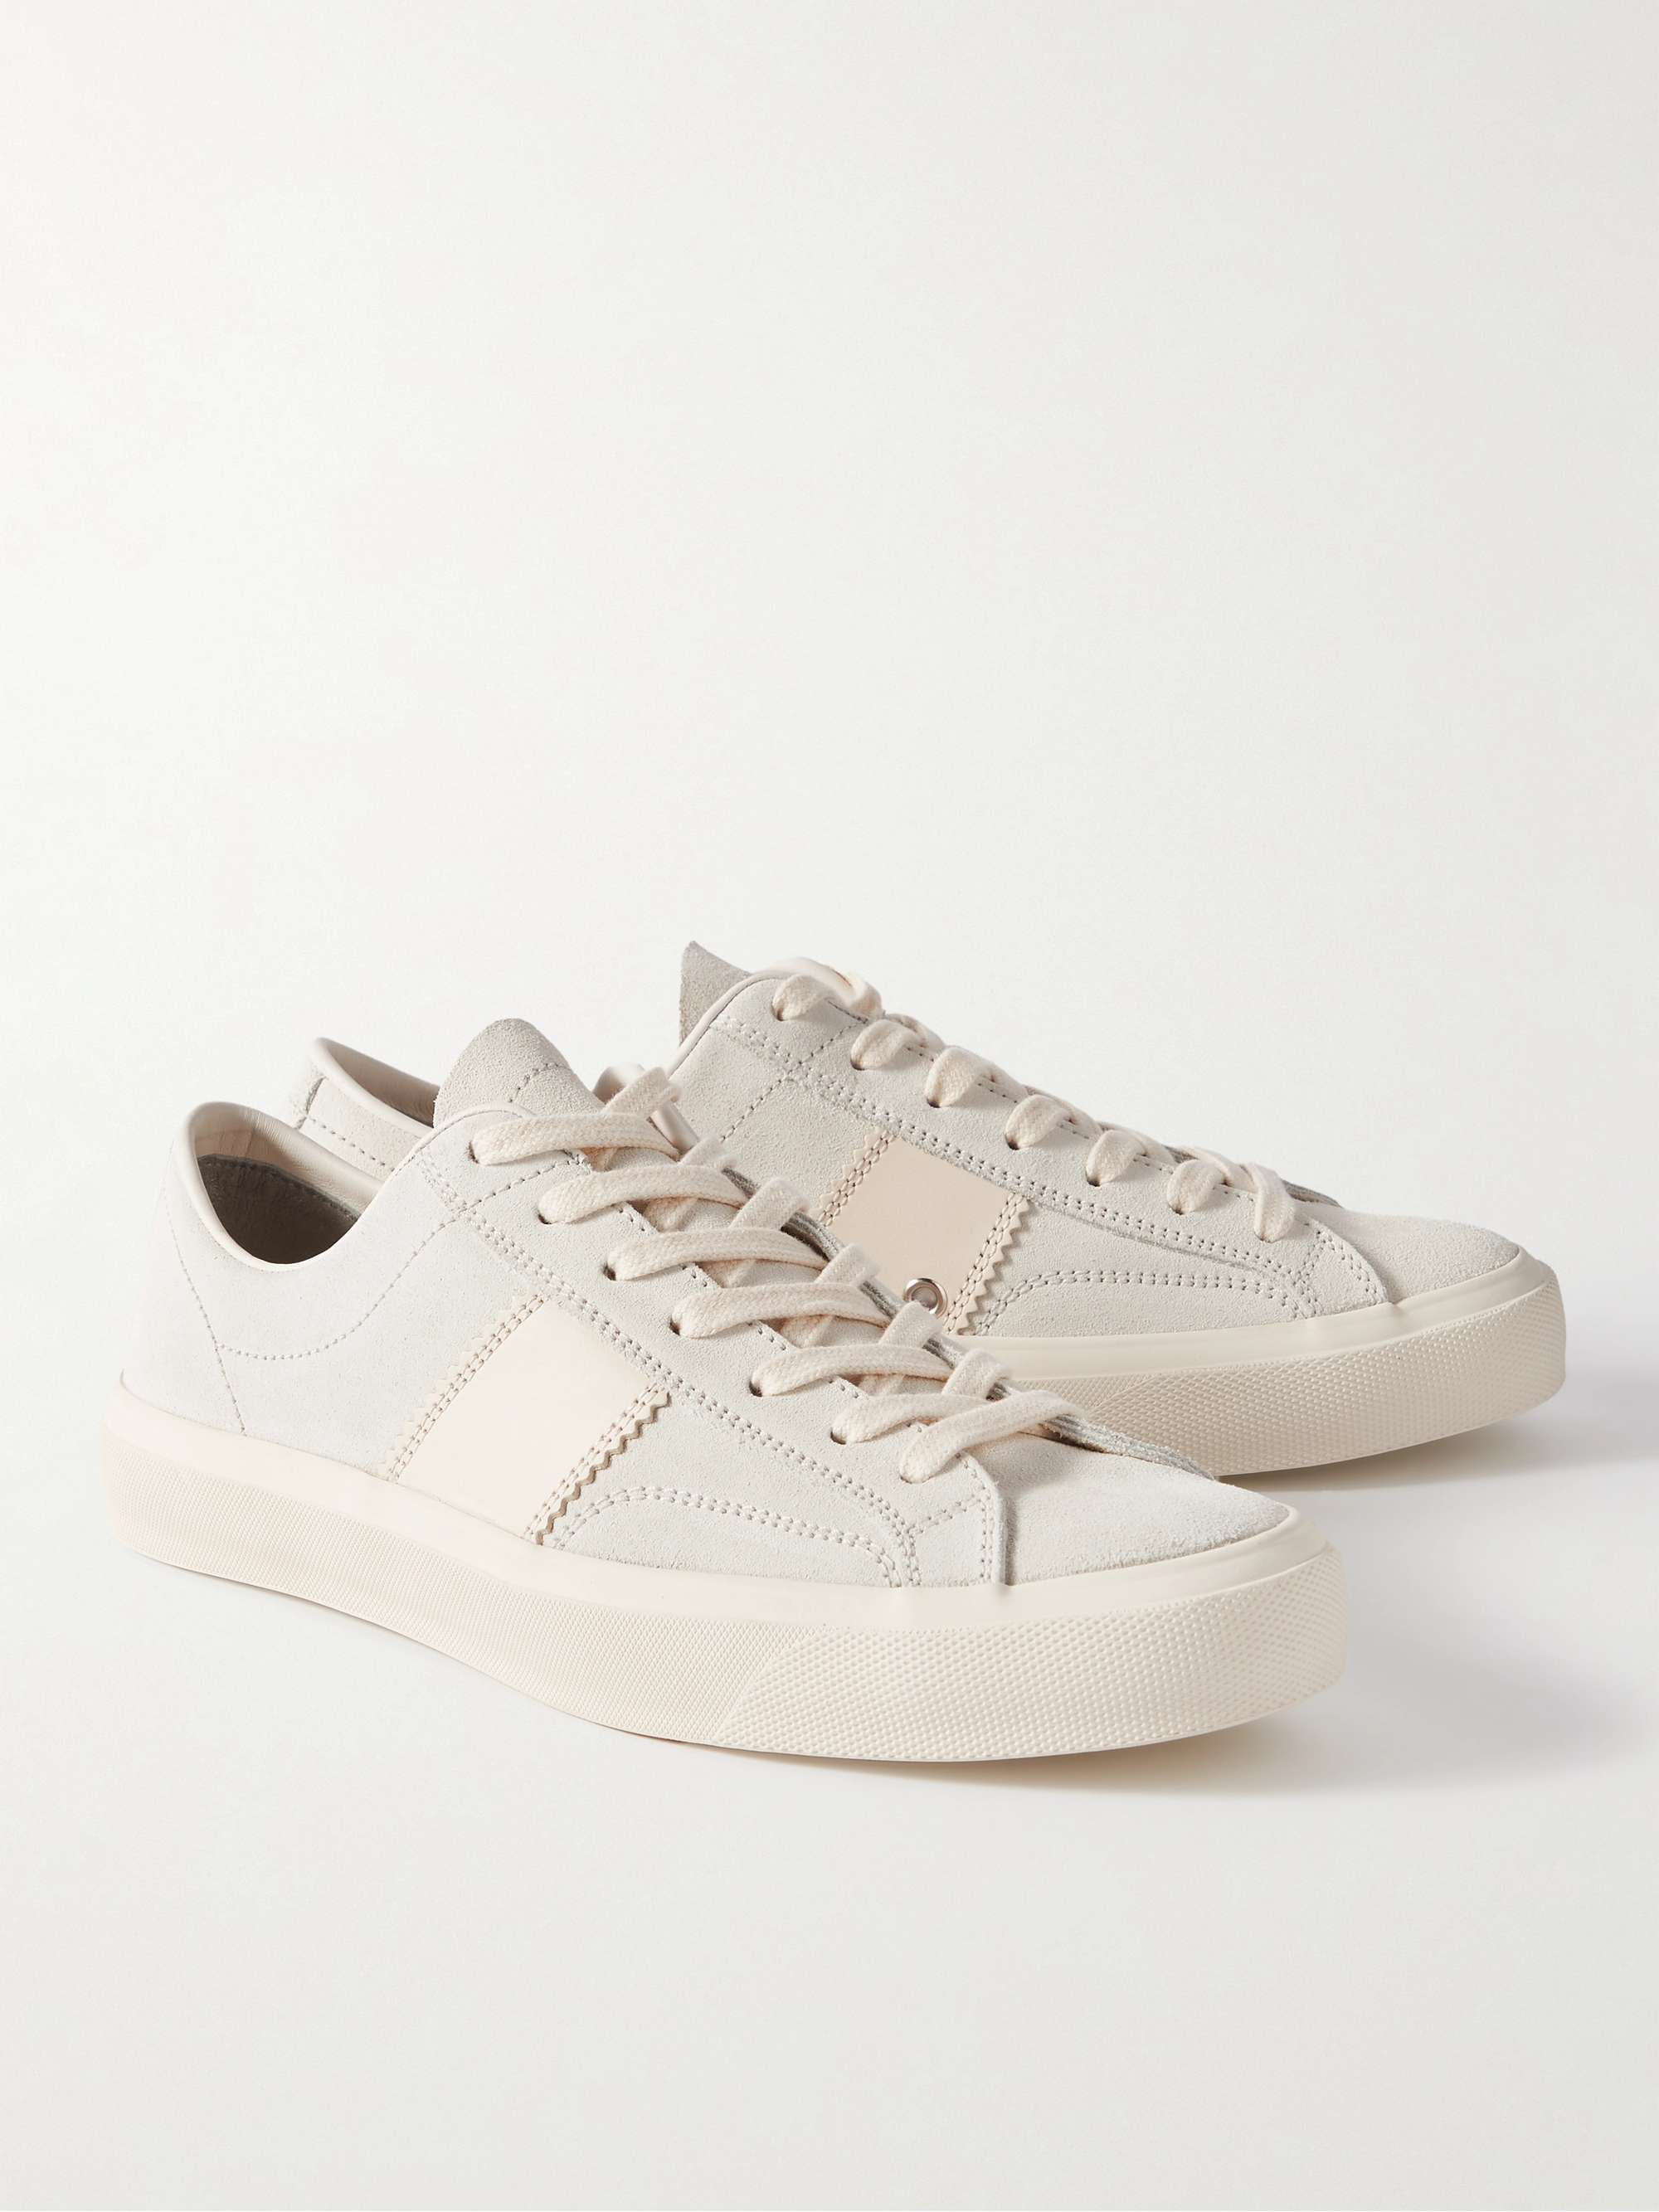 TOM FORD Cambridge Leather-Trimmed Suede Sneakers | MR PORTER